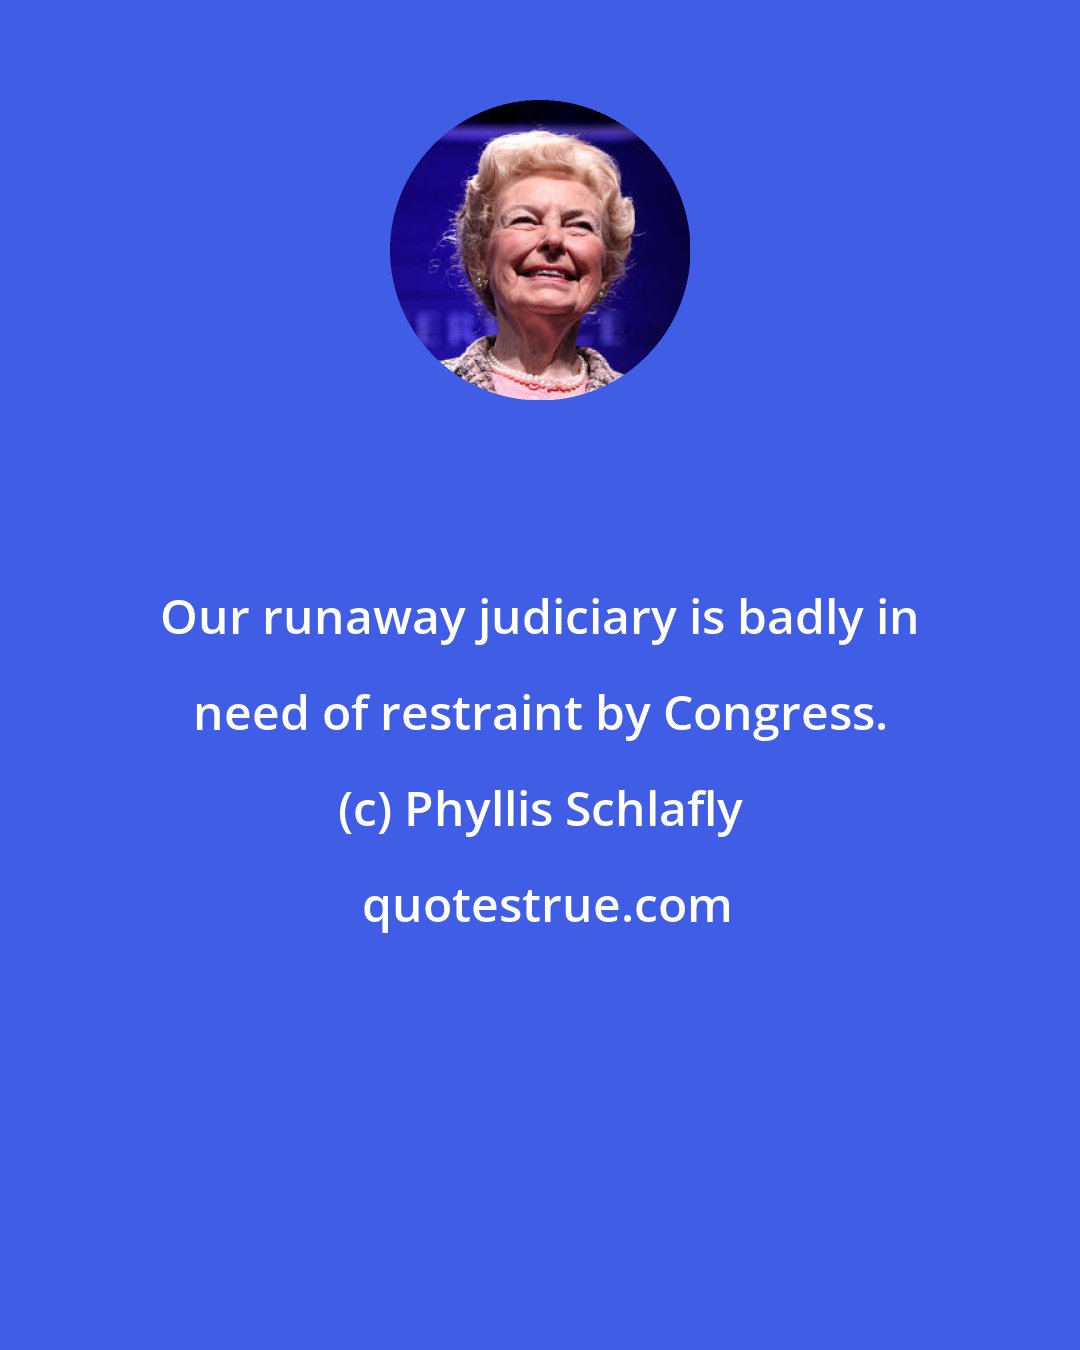 Phyllis Schlafly: Our runaway judiciary is badly in need of restraint by Congress.